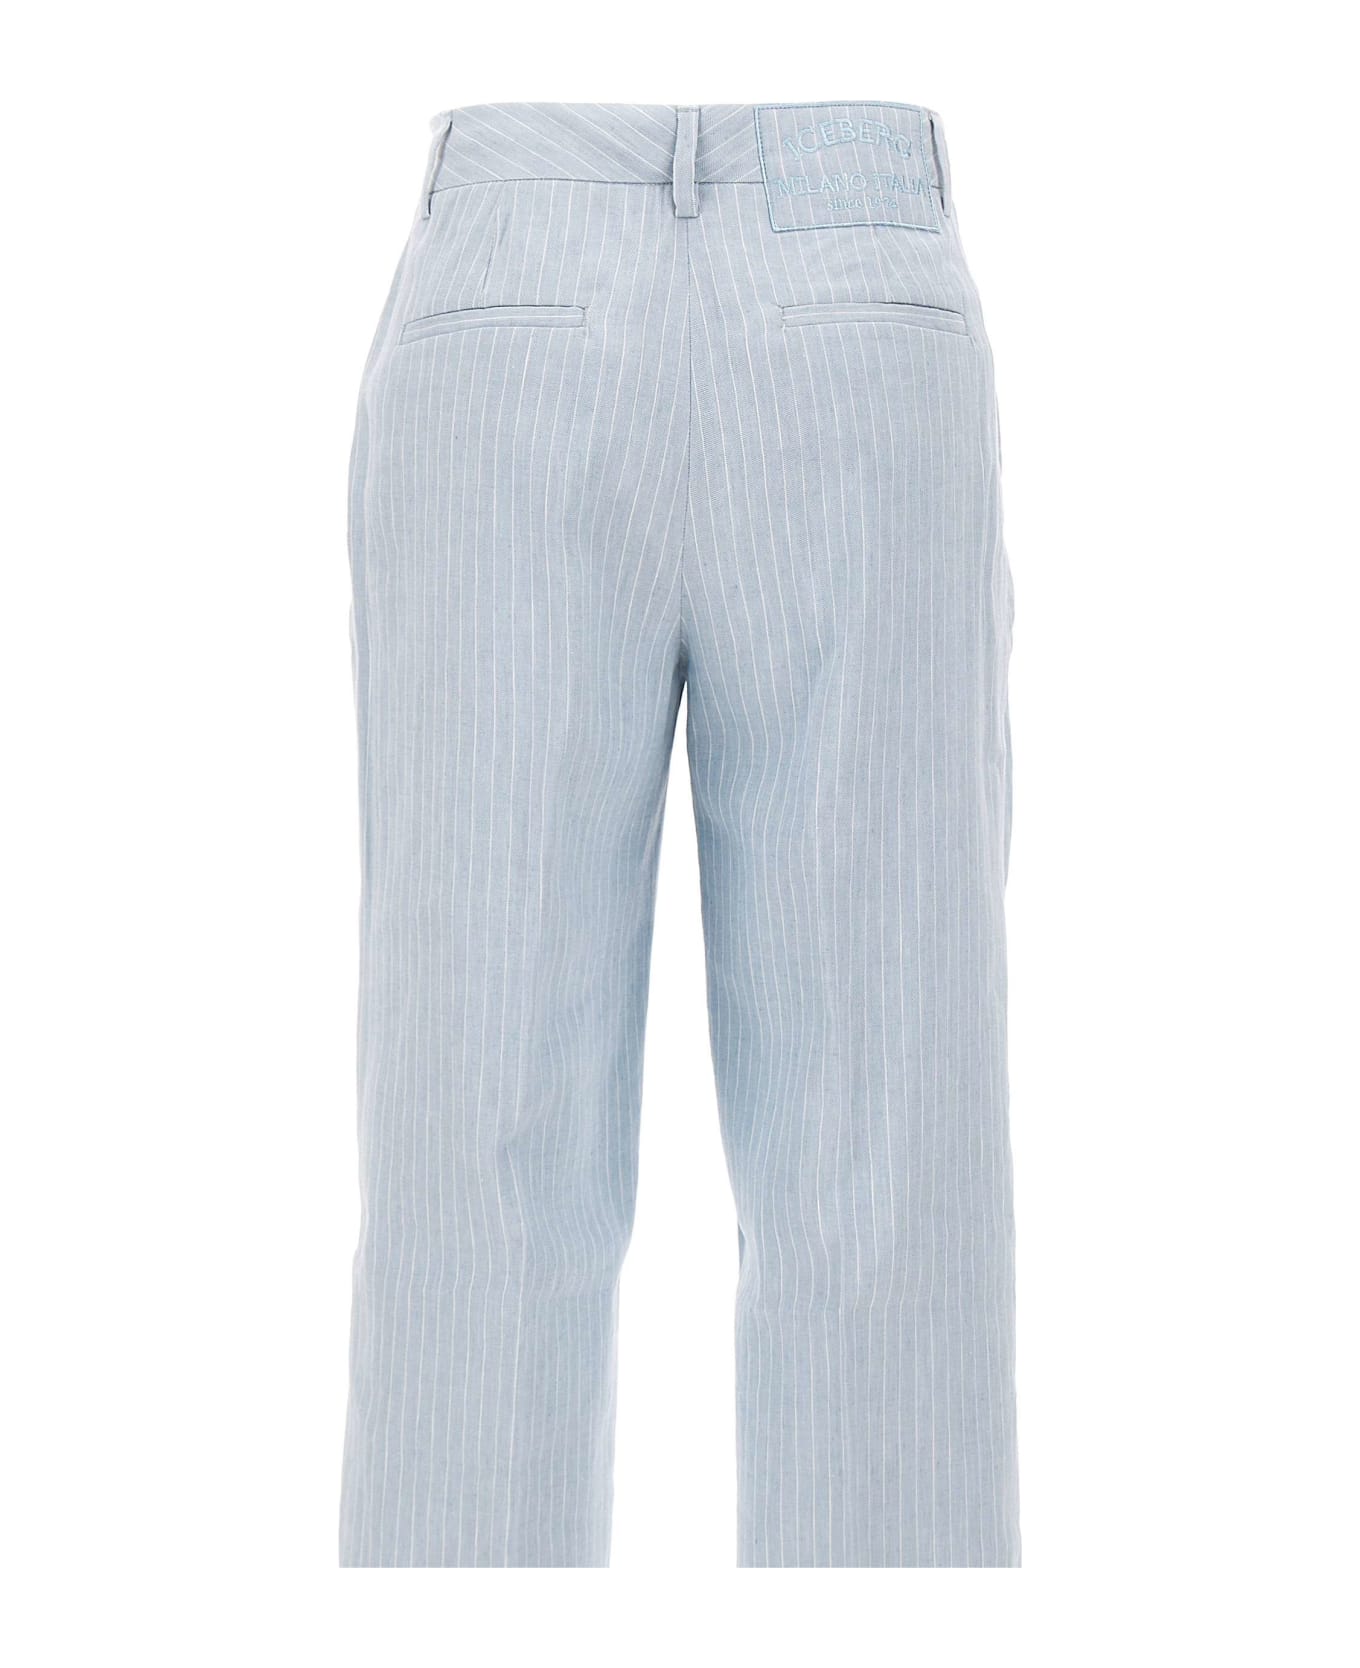 Iceberg Linen And Cotton Trousers - LIGHT BLUE